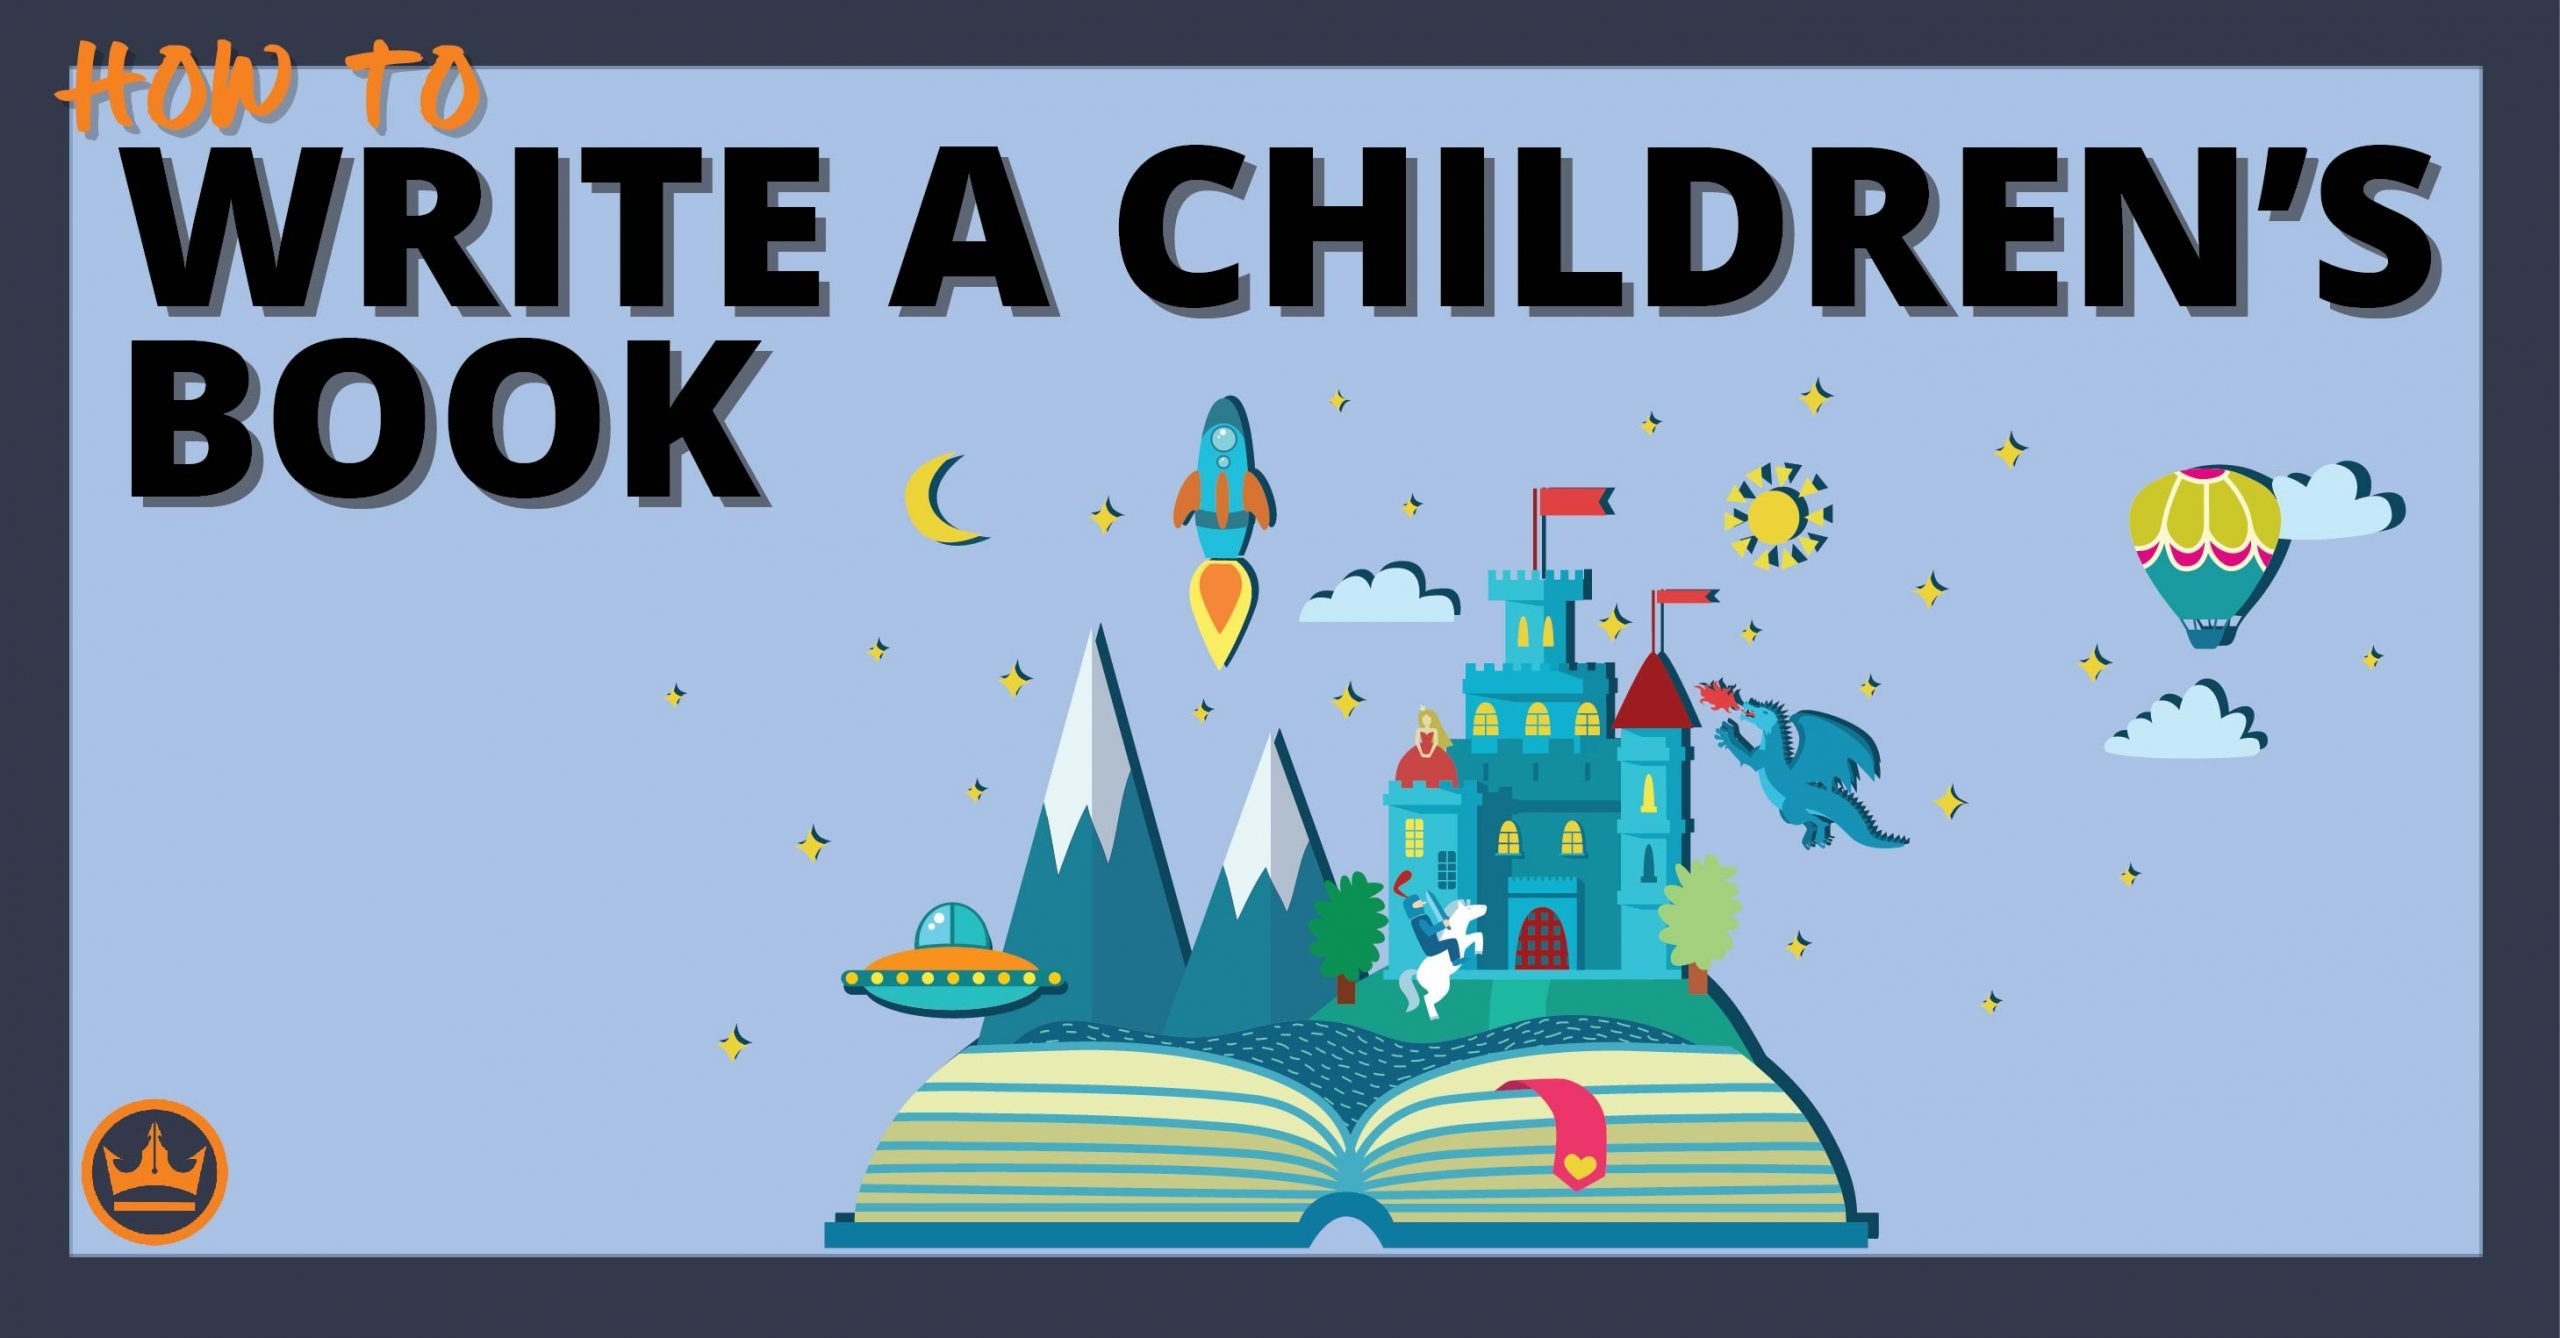 Become A Children’s Author With A Complete Amazon Self-Publishing Guide